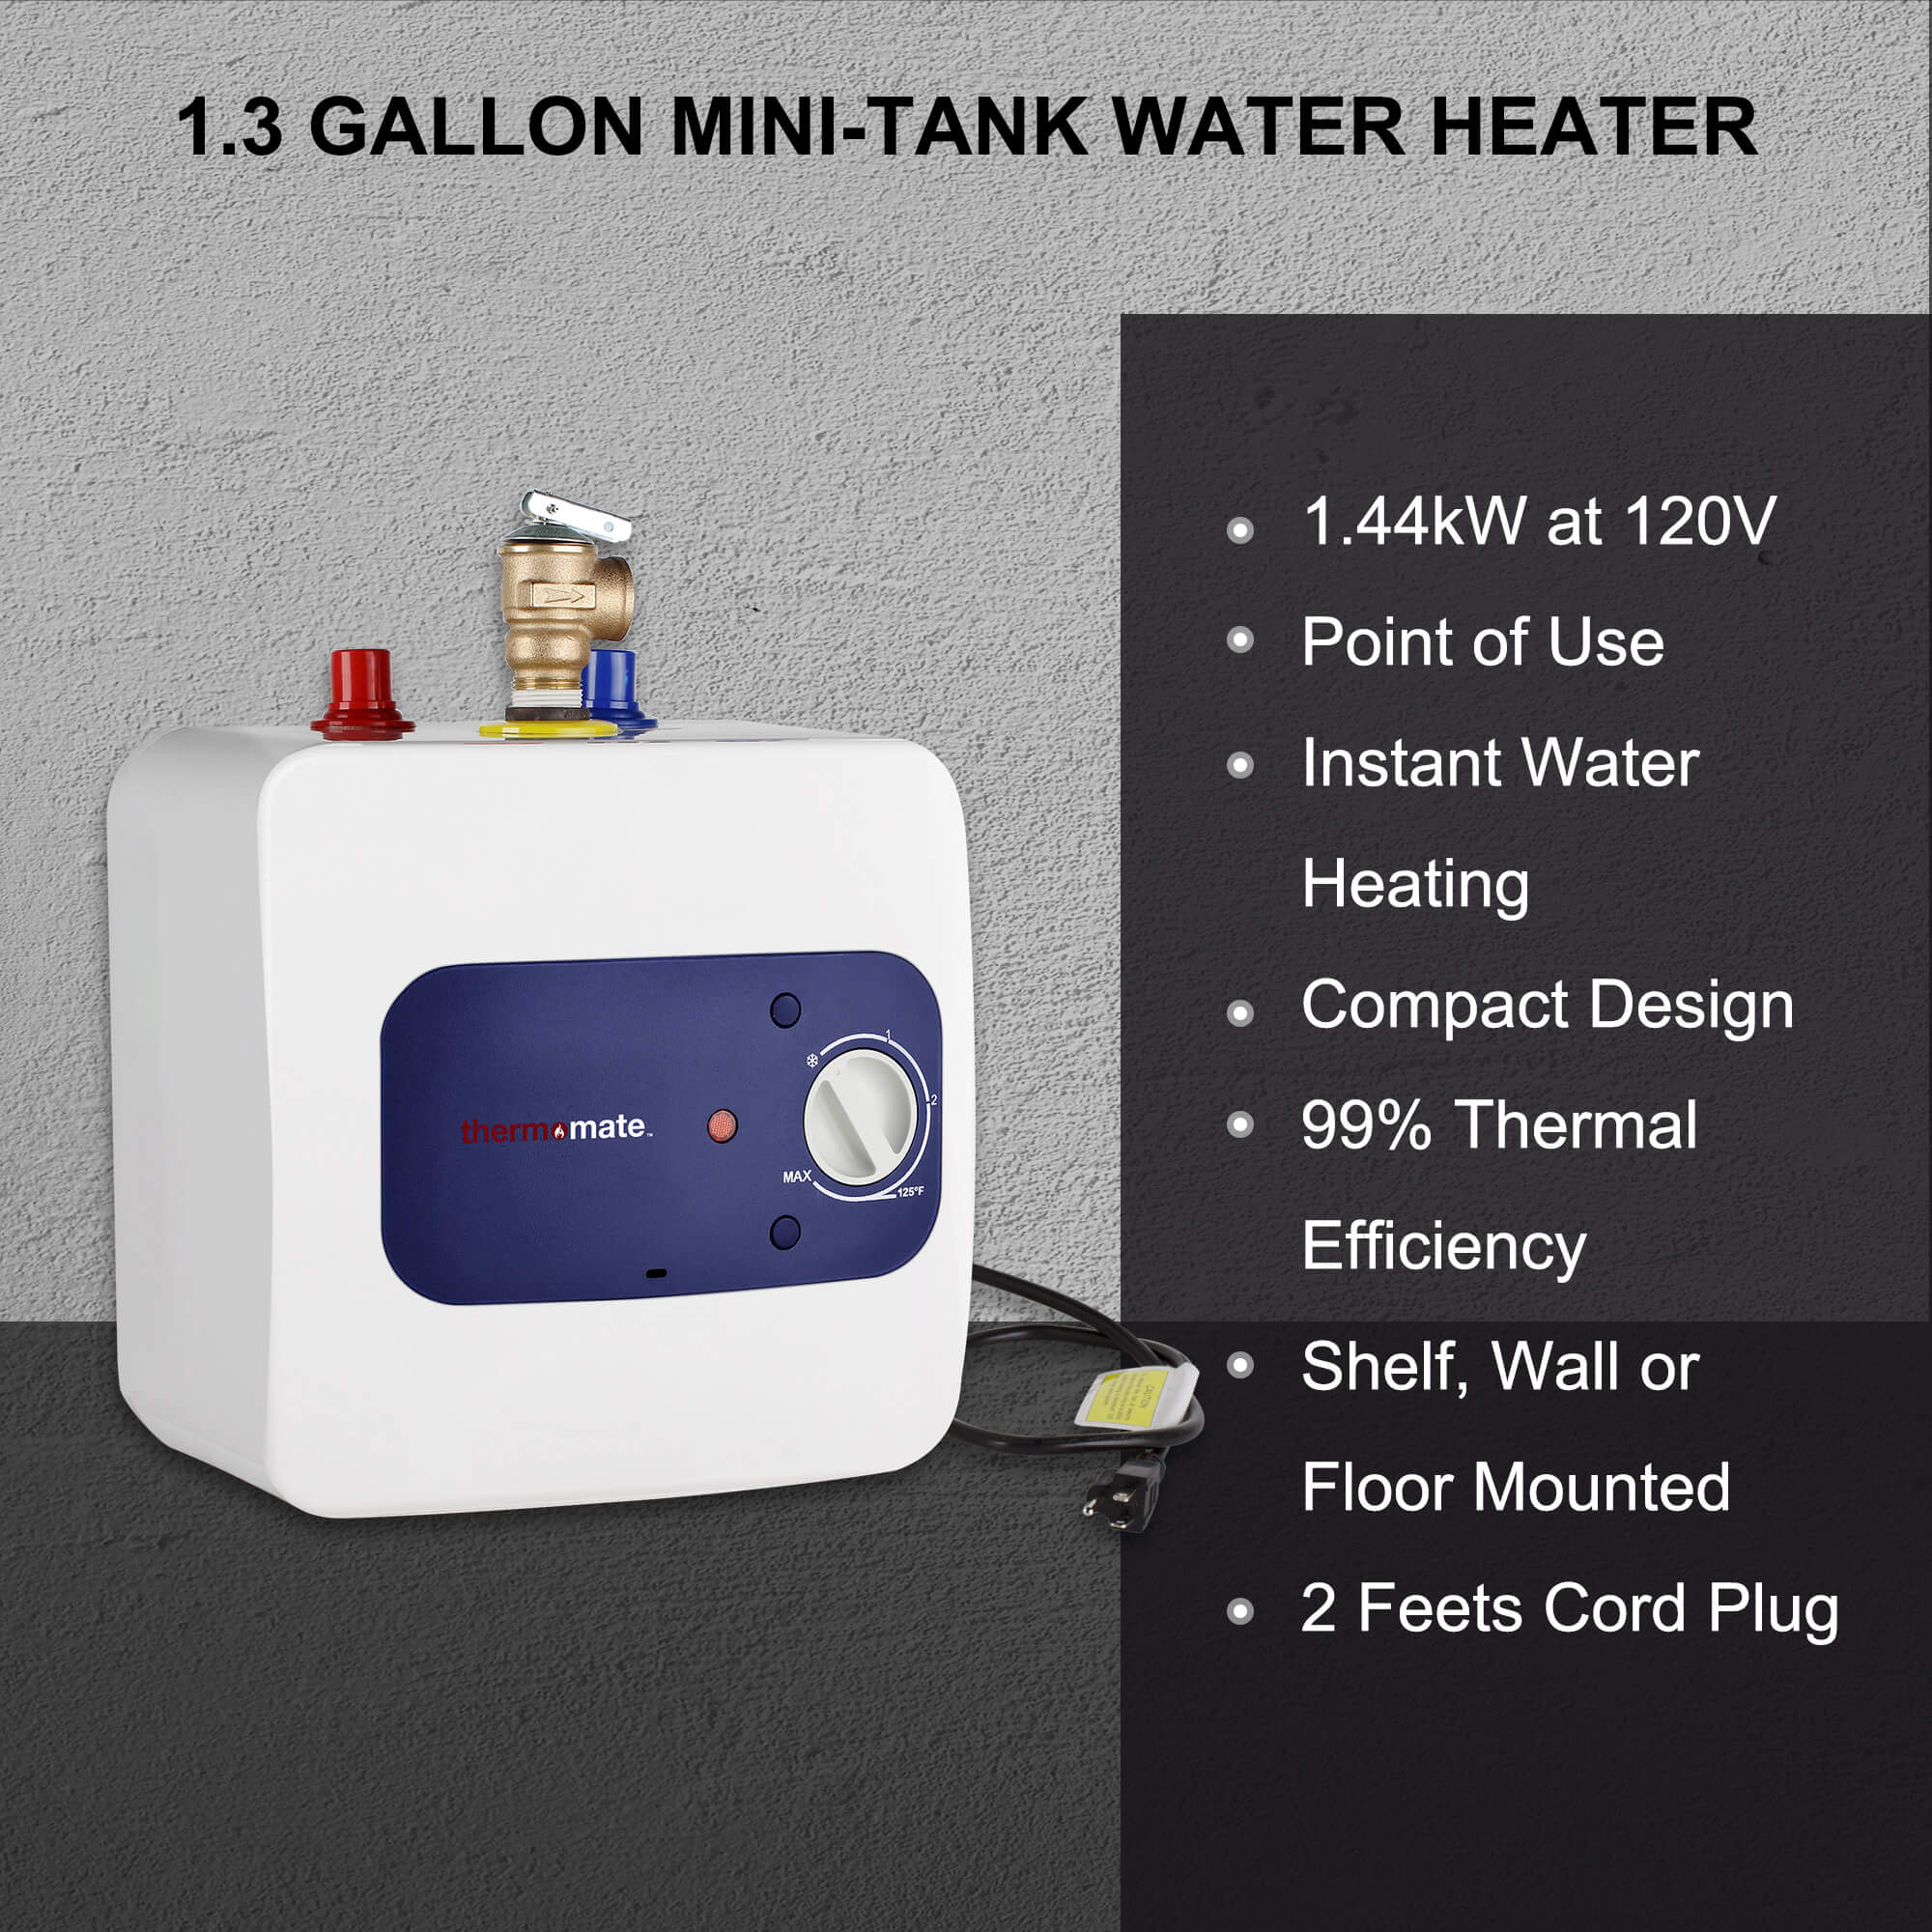 thermomate Mini Tank Electric Water Heater ES150 1.3 Gallons Point of Use Heater